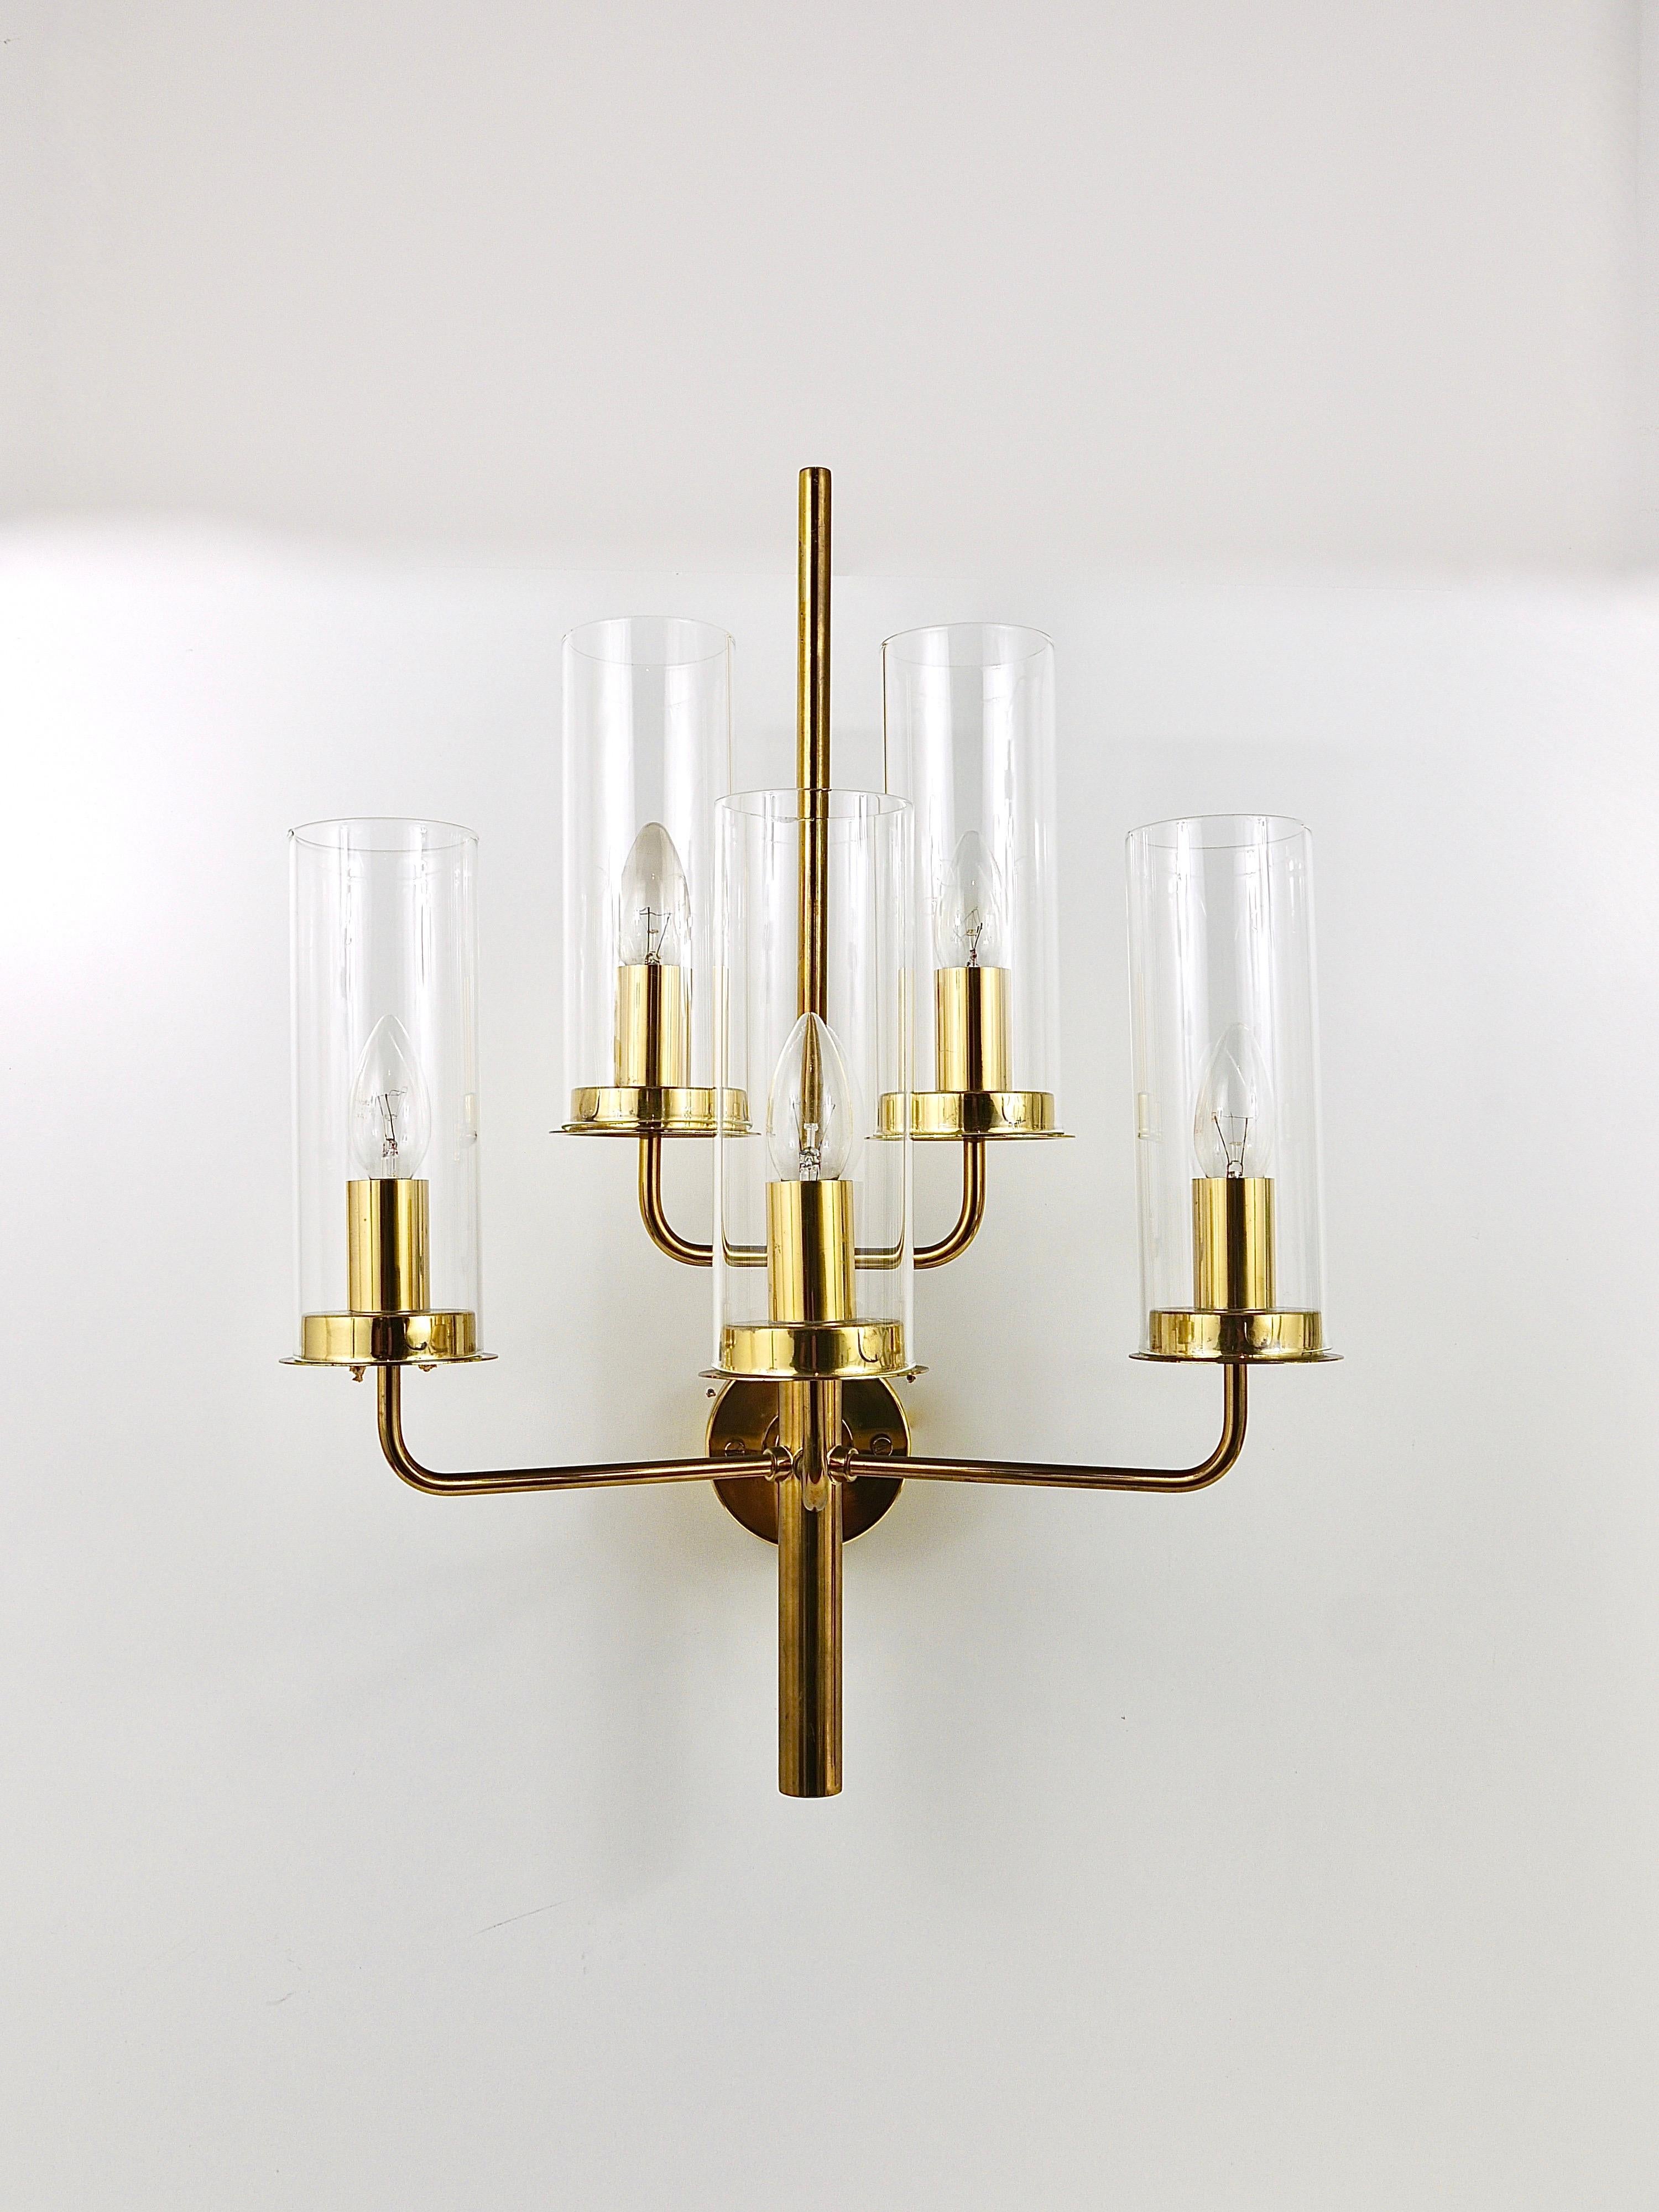 A beautiful and elegant, large modernist candelabra brass wall light / sconce from the 1960s, model Sonata V-169/5, designed and executed by Hans Agne Jakobsson AB, Markaryd Sweden. This wonderful lamp features a round fixture with five arms. Each